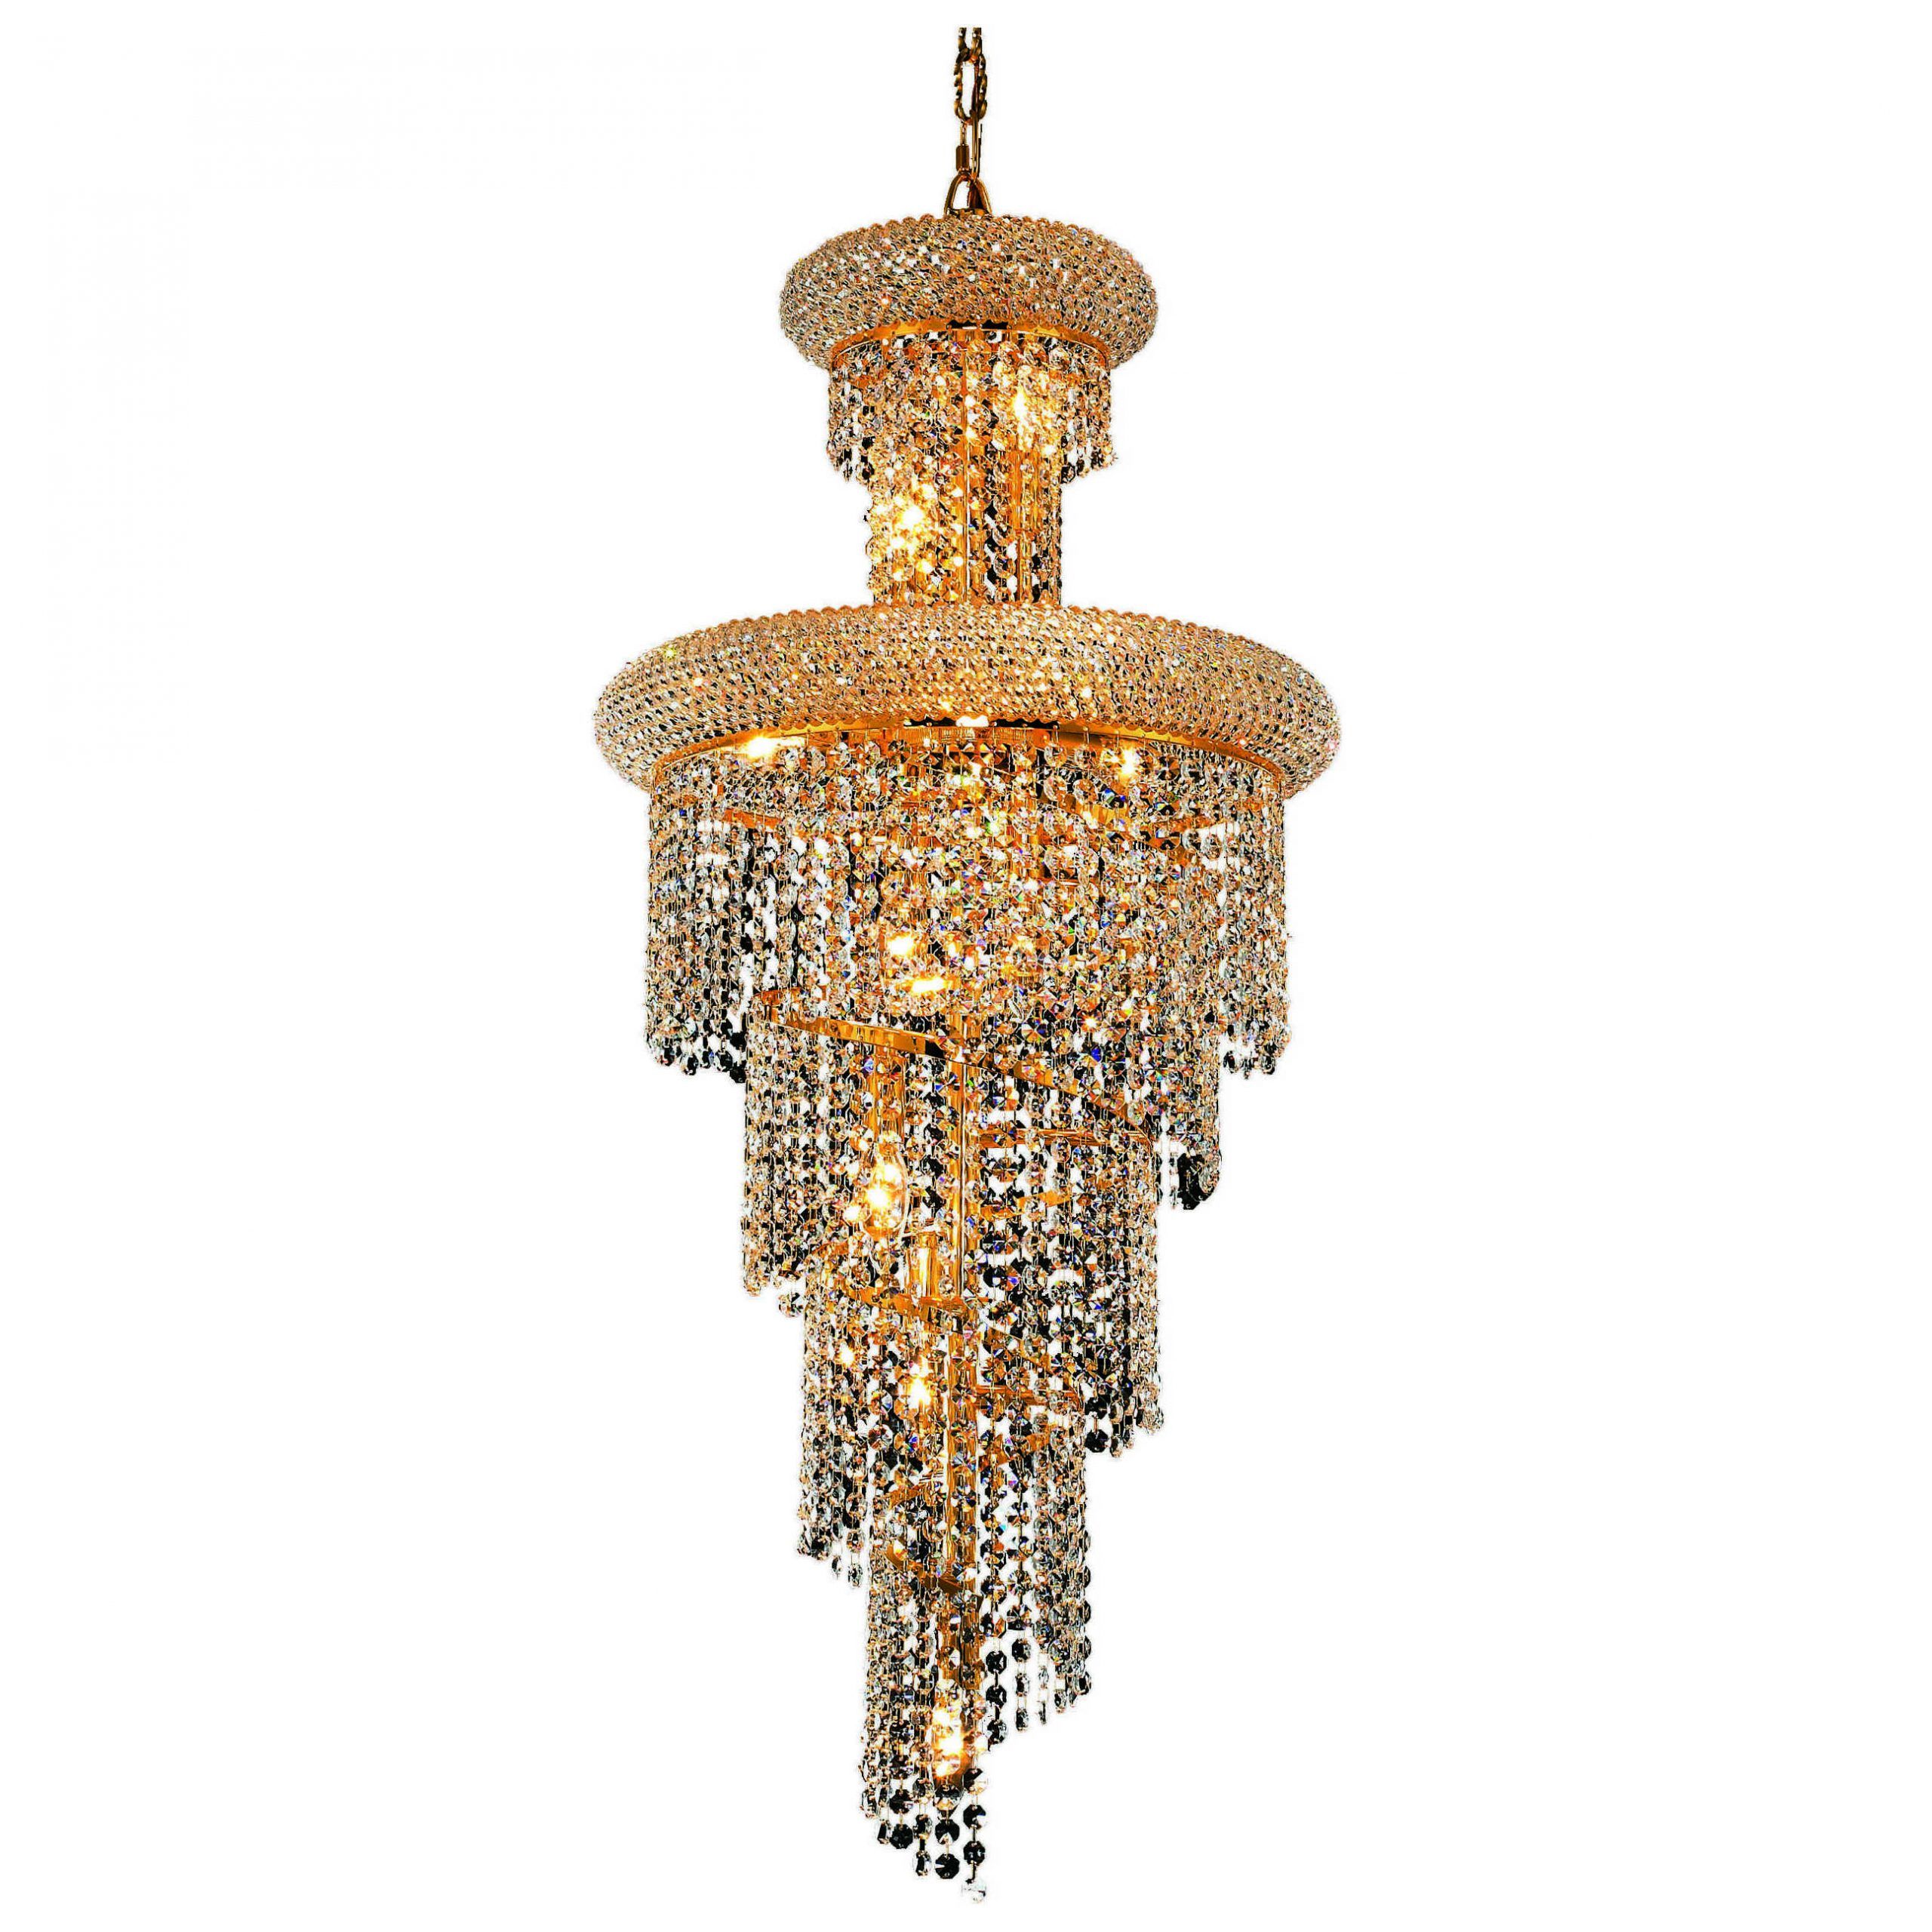 Elegant Lighting Spiral Royal Cut Gold & Crystal Ten Light Regarding Most Recently Released Royal Cut Crystal Chandeliers (View 2 of 20)